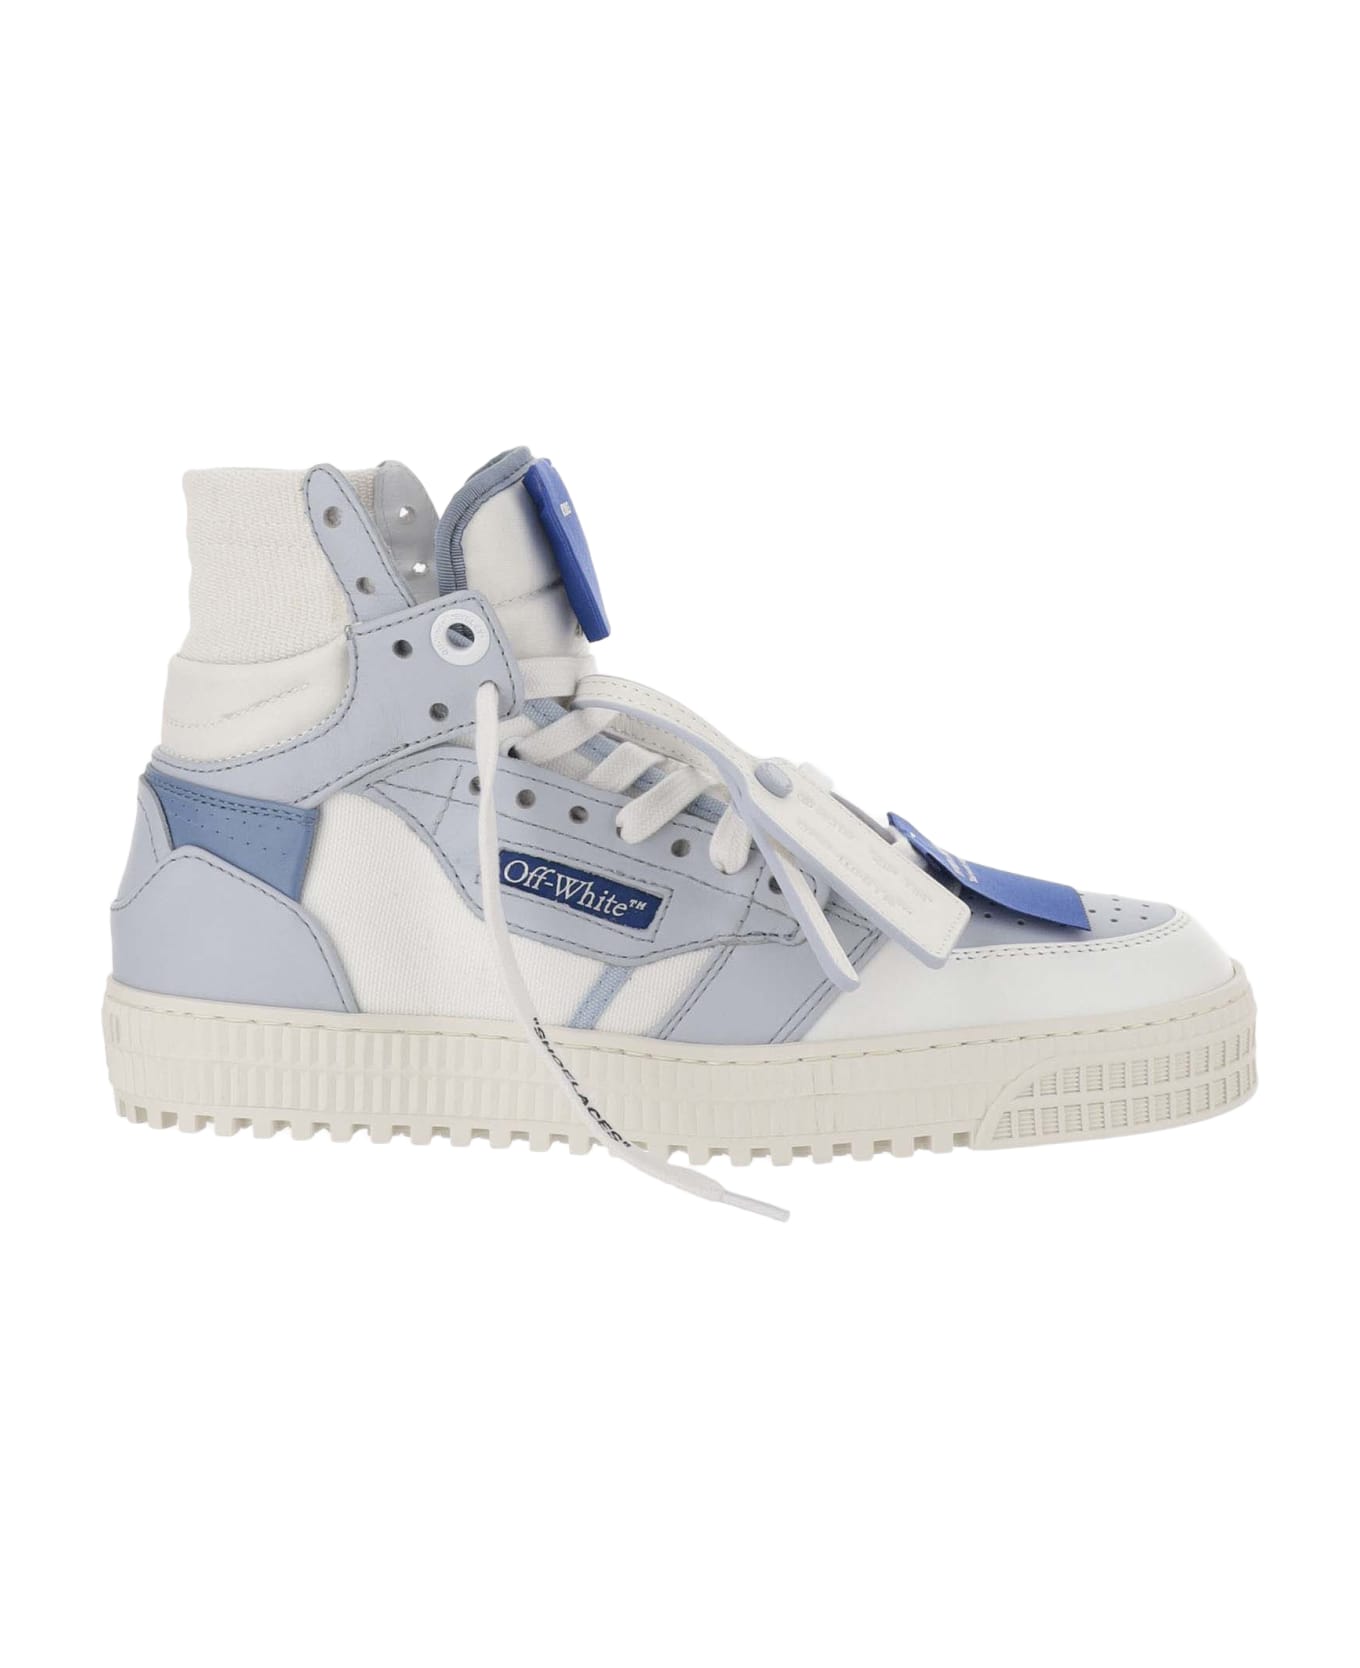 Off-White Off Court 3.0 Sneakers - Blue スニーカー